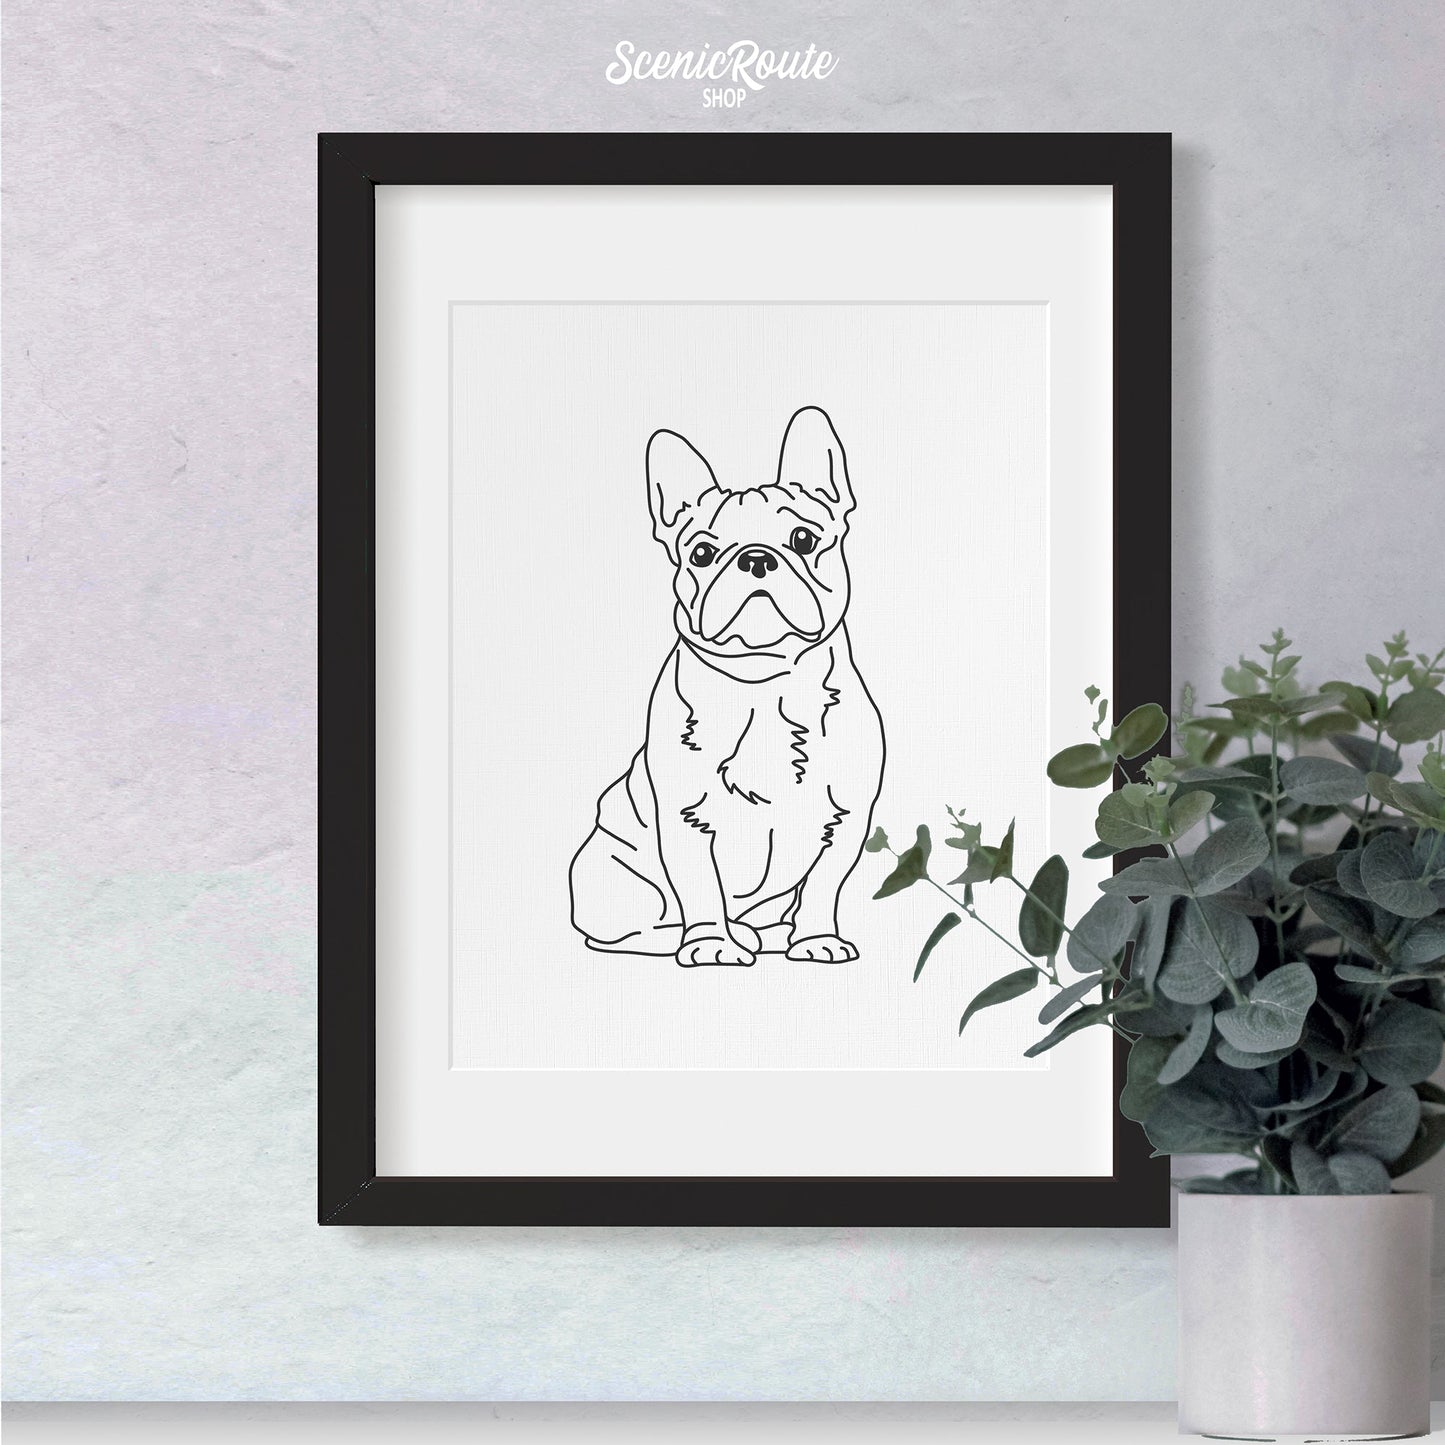 A framed line art drawing of a French Bulldog dog on a white wall with a plant